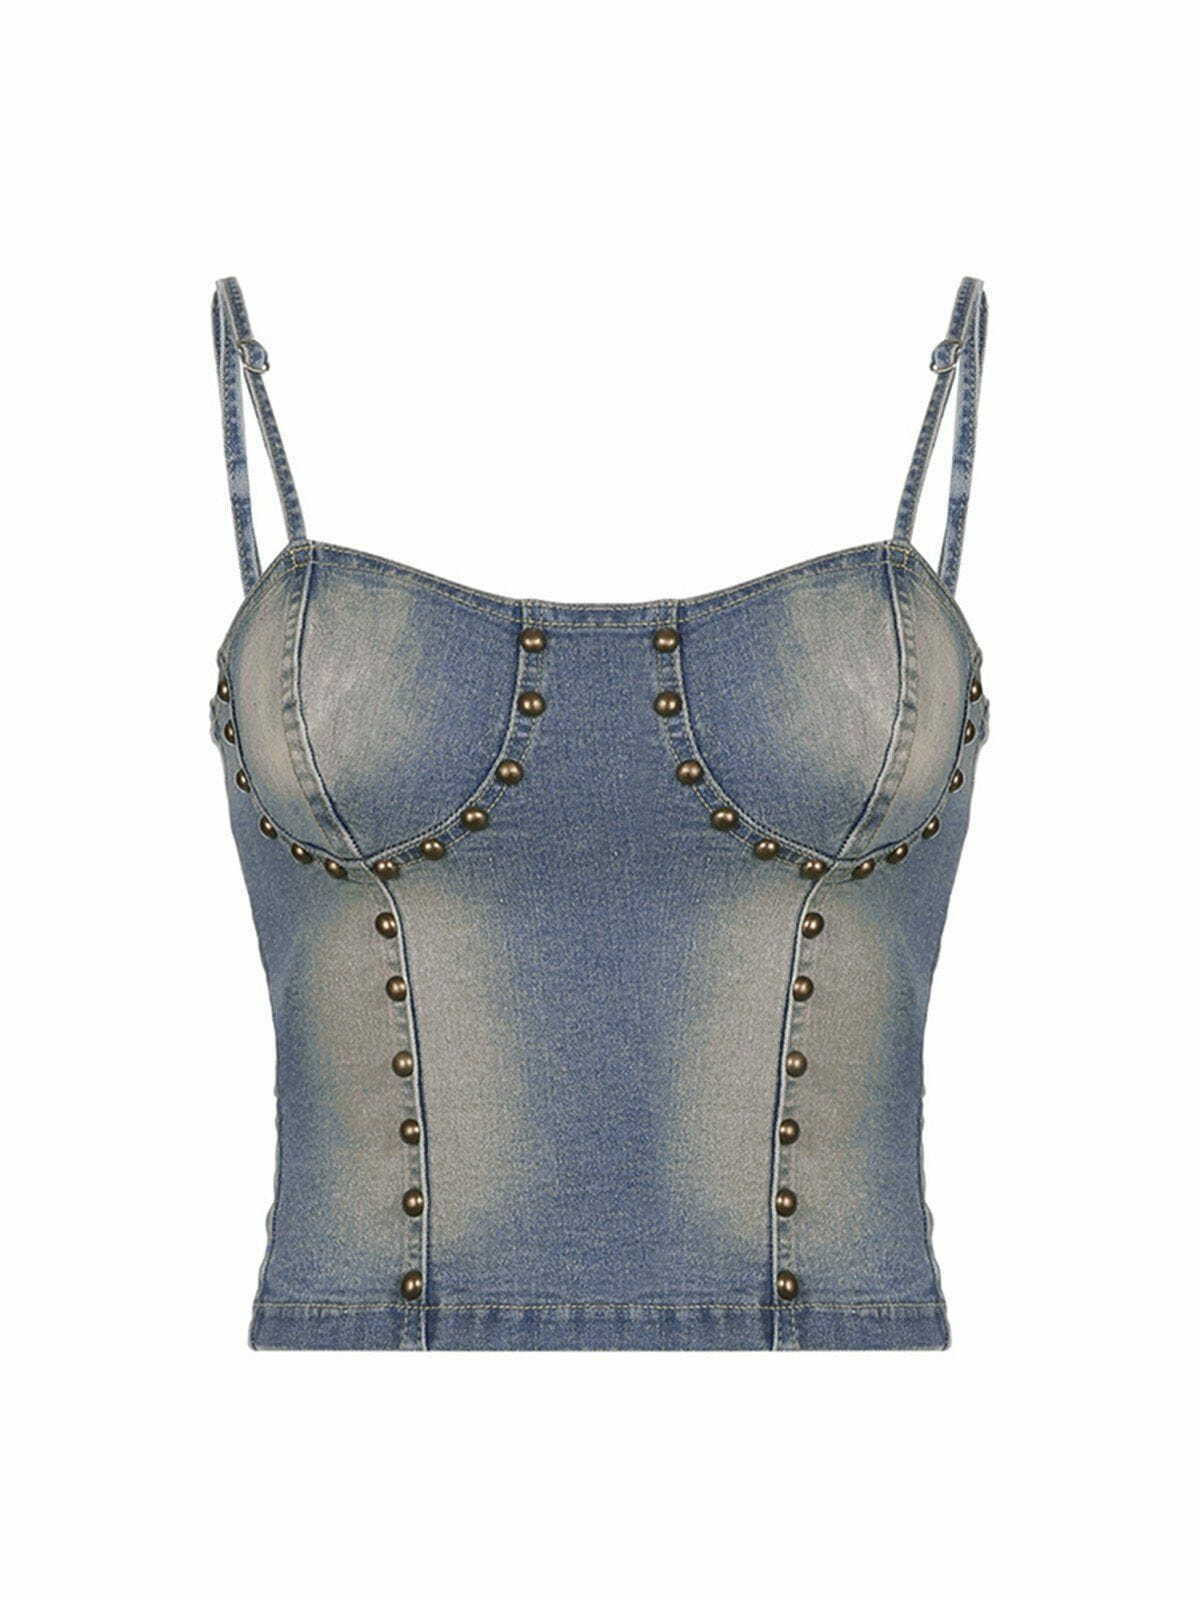 edgy studded denim camis top   youthful & chic appeal 1001